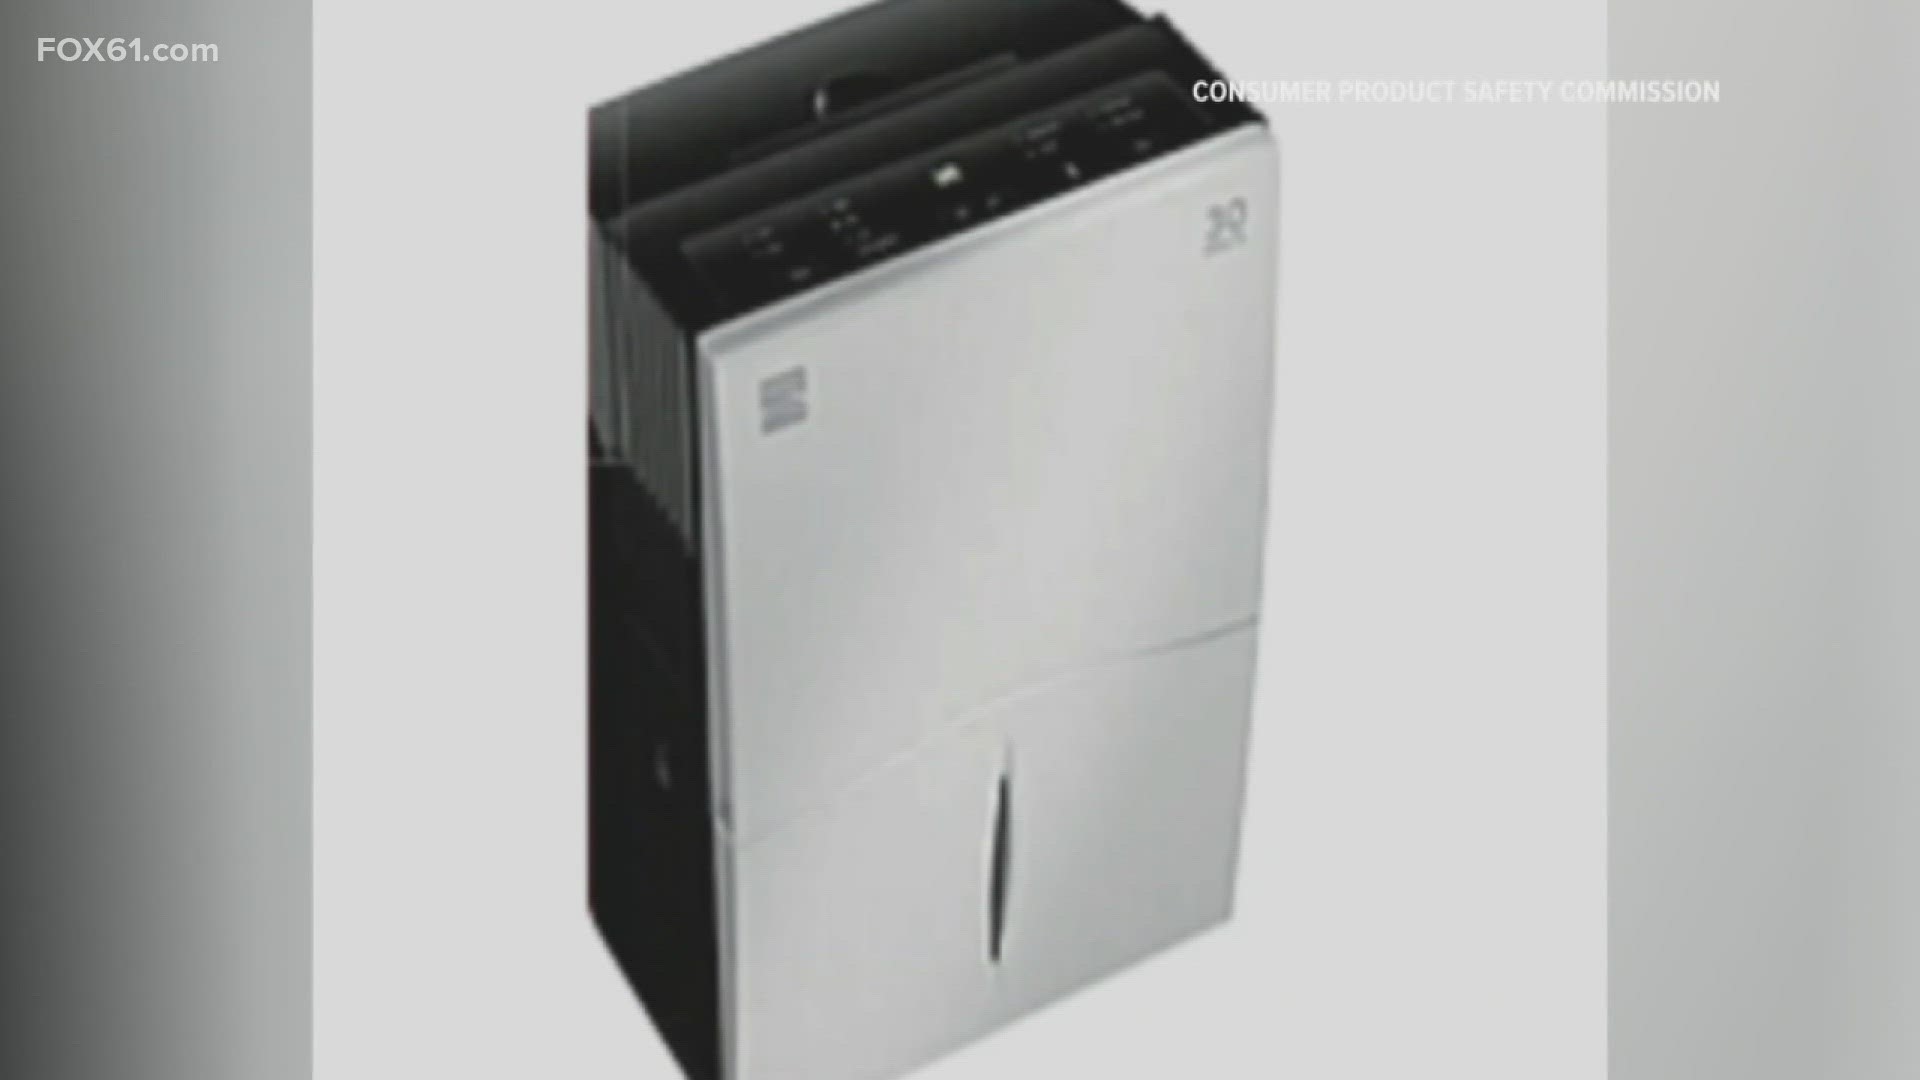 The recall includes 42 models of dehumidifiers sold under five brand names: Kenmore, GE, SoleusAir, Norpole and Seabreeze.